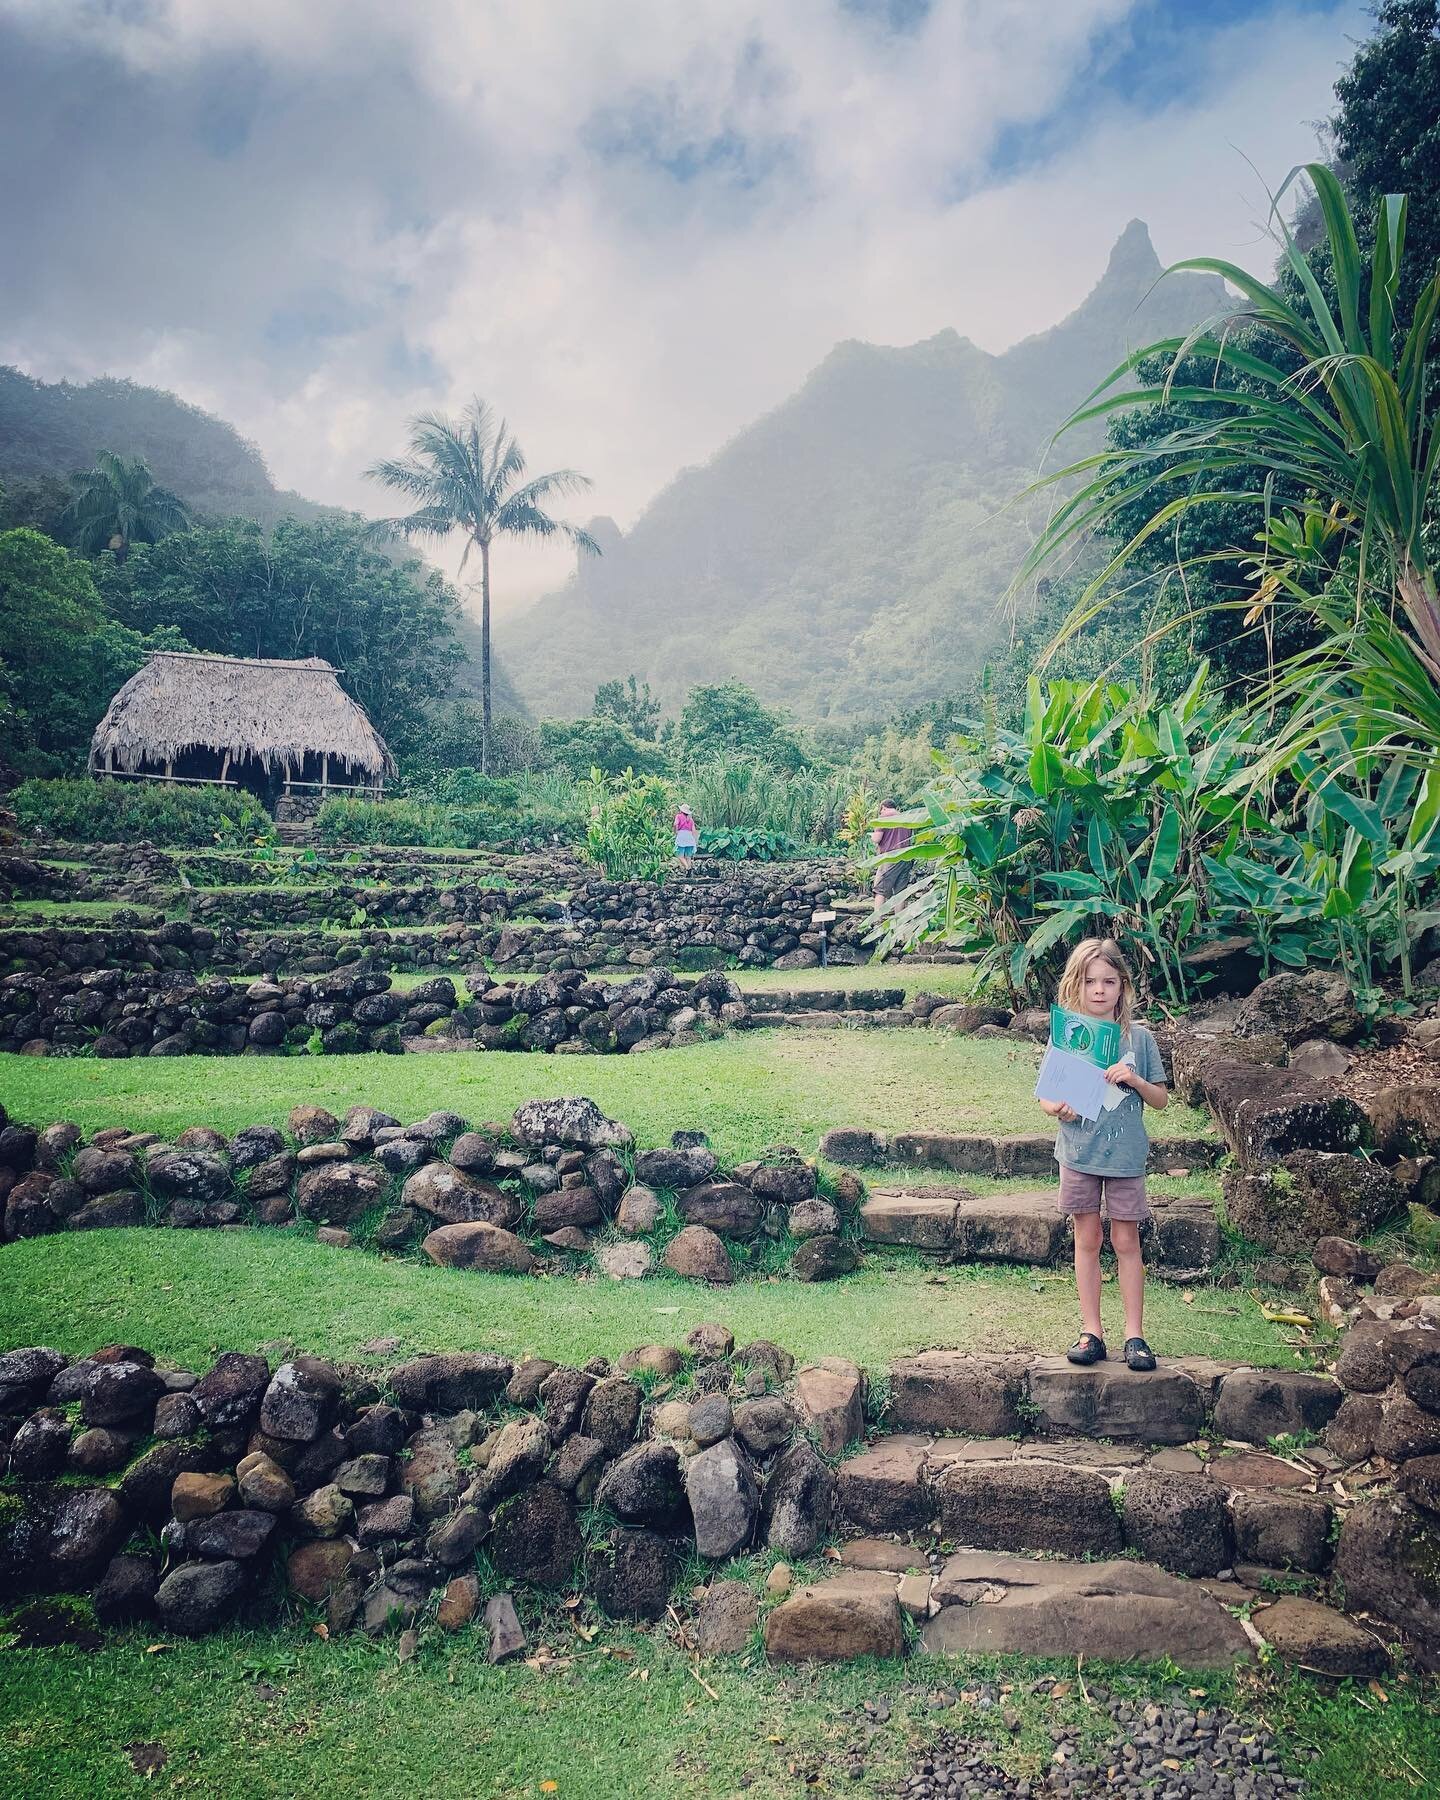 Limahuli gardens were a cherished highlight! These terraced farms were planted by Polynesian voyagers approximately 1,000 years ago and the plants tell a magical story of the islander&rsquo;s gorgeous culture and their complex understanding of medici